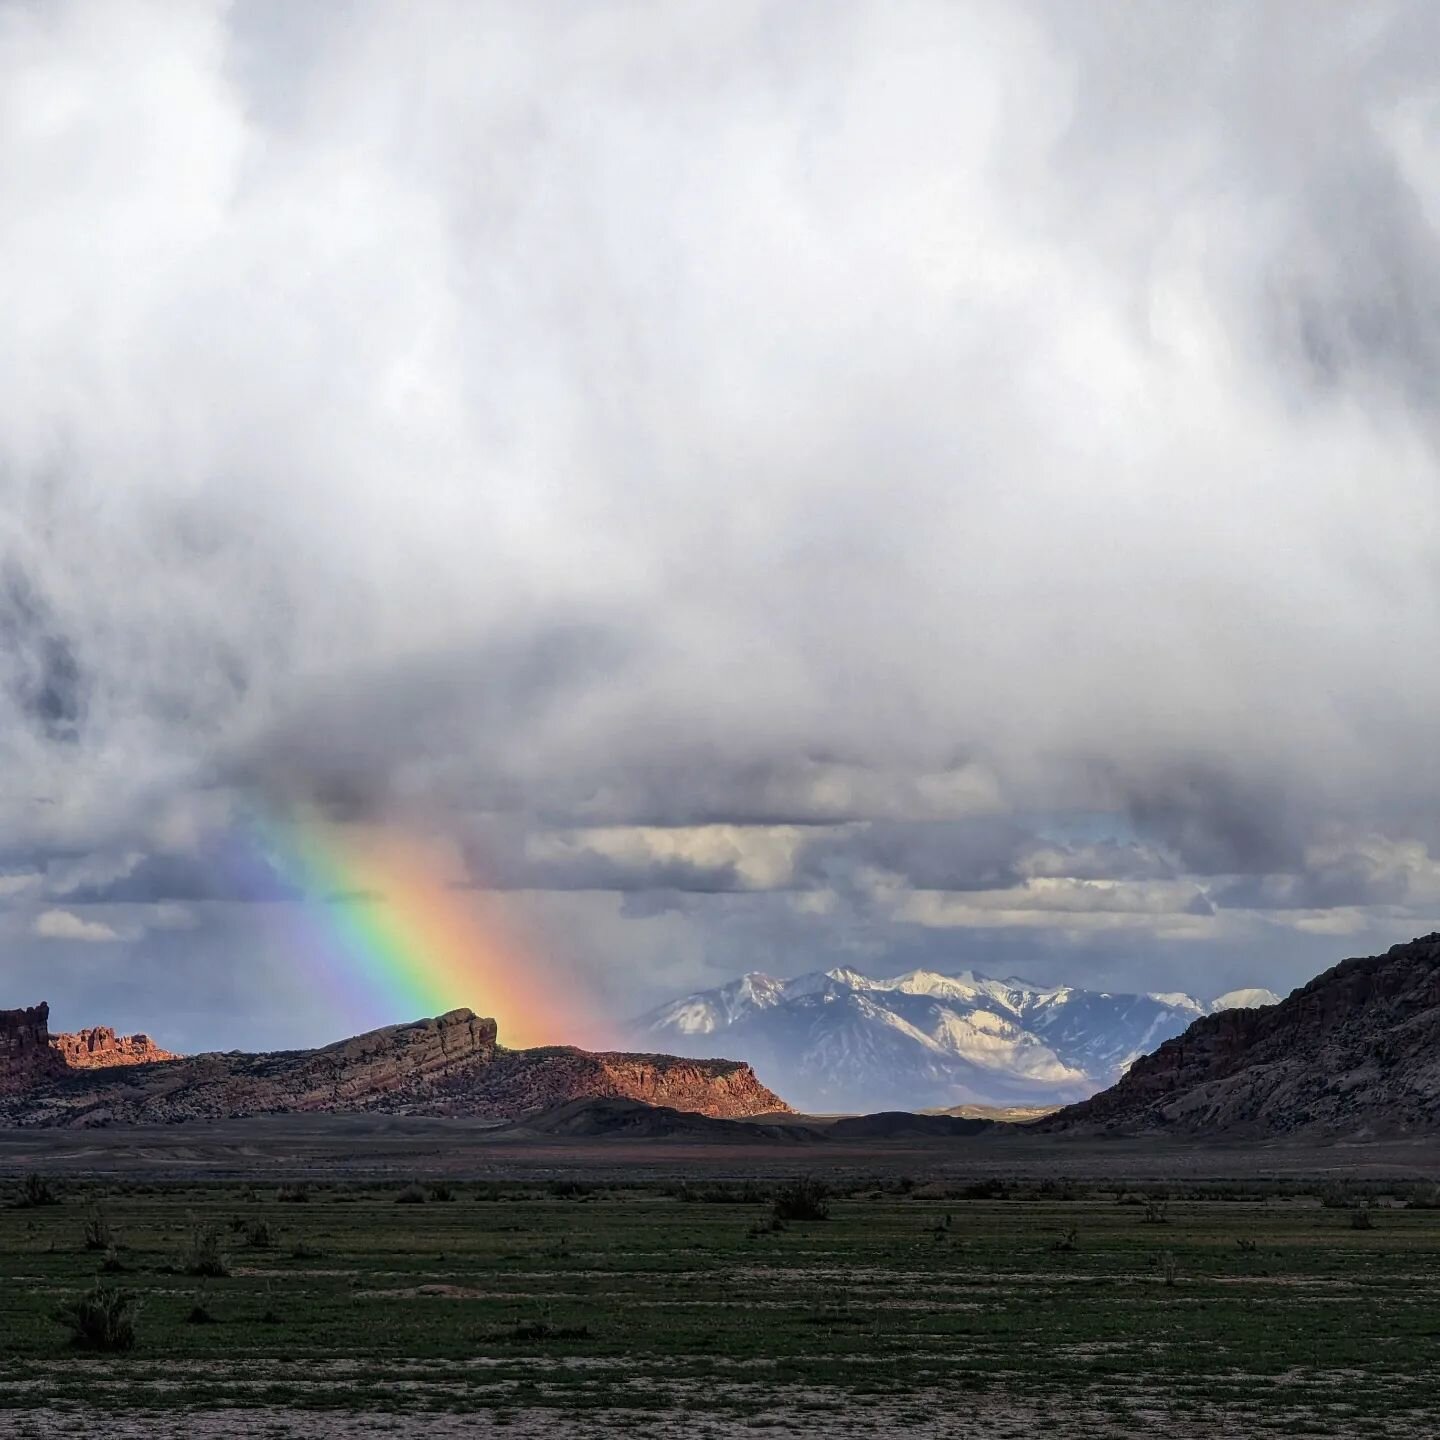 A little #rainbow in the afternoon as storms roll through the valley. #moab #boondocking #rvliving